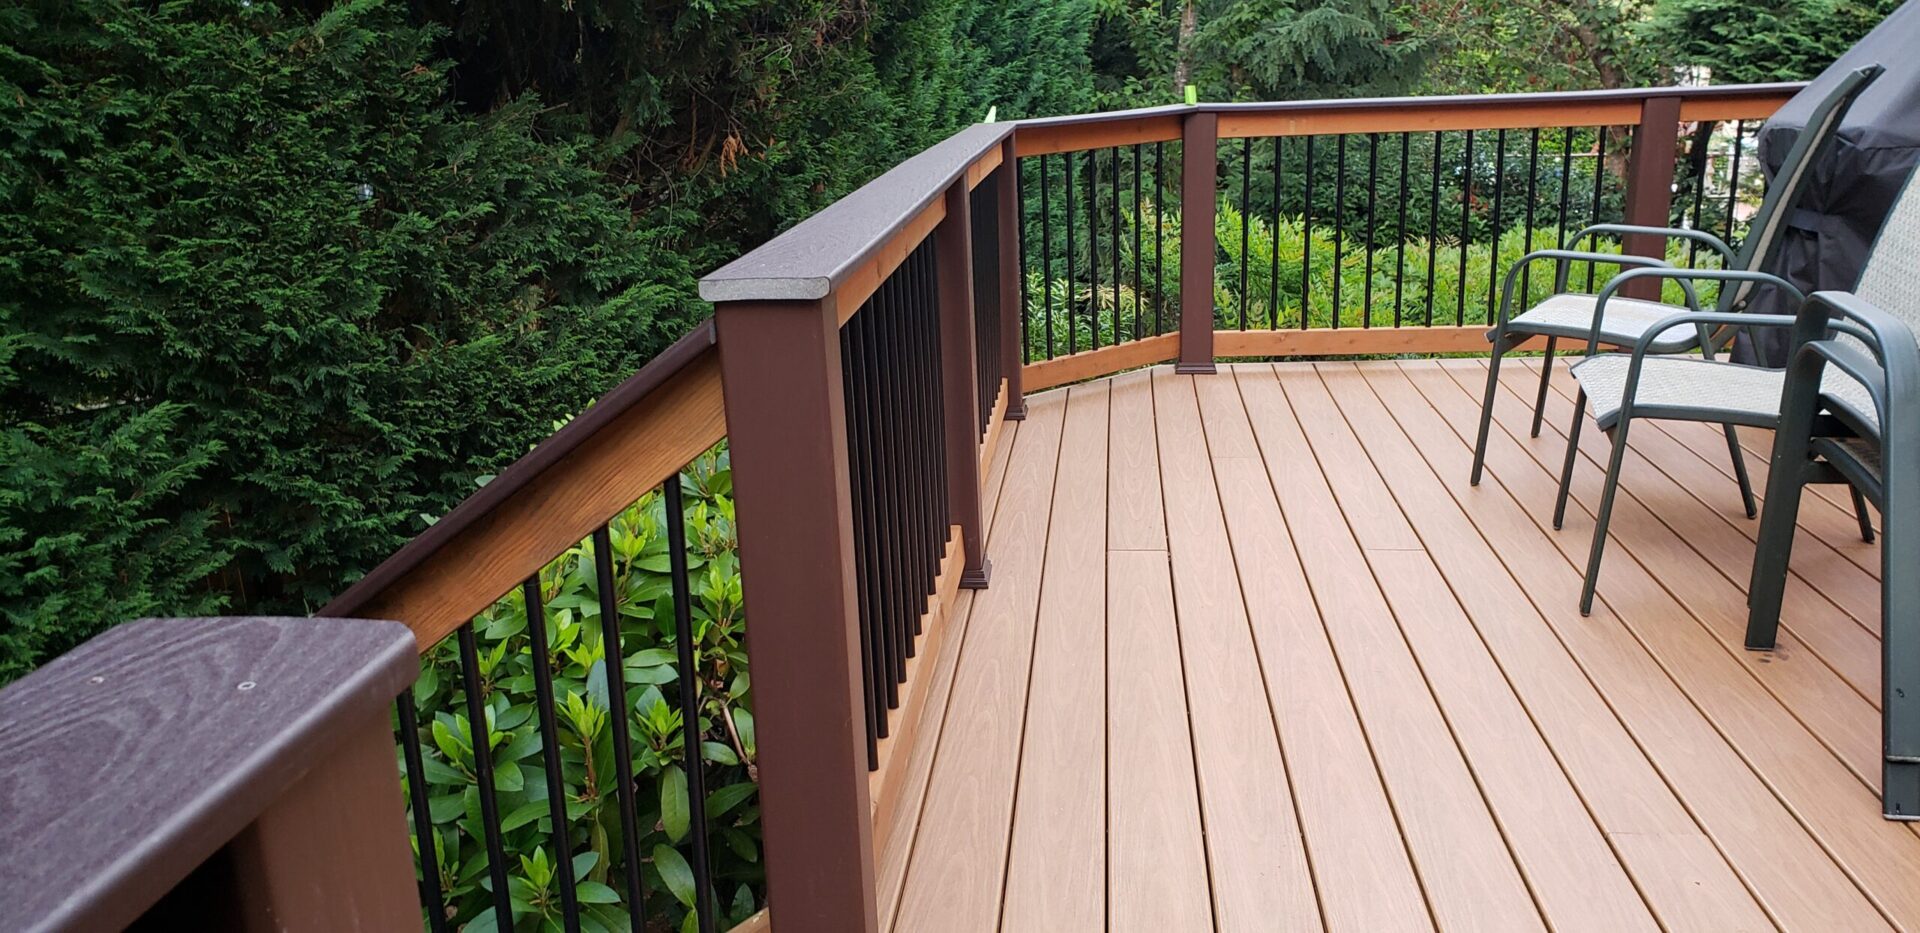 Large composite deck on colonial style house With Brown Color Railing.